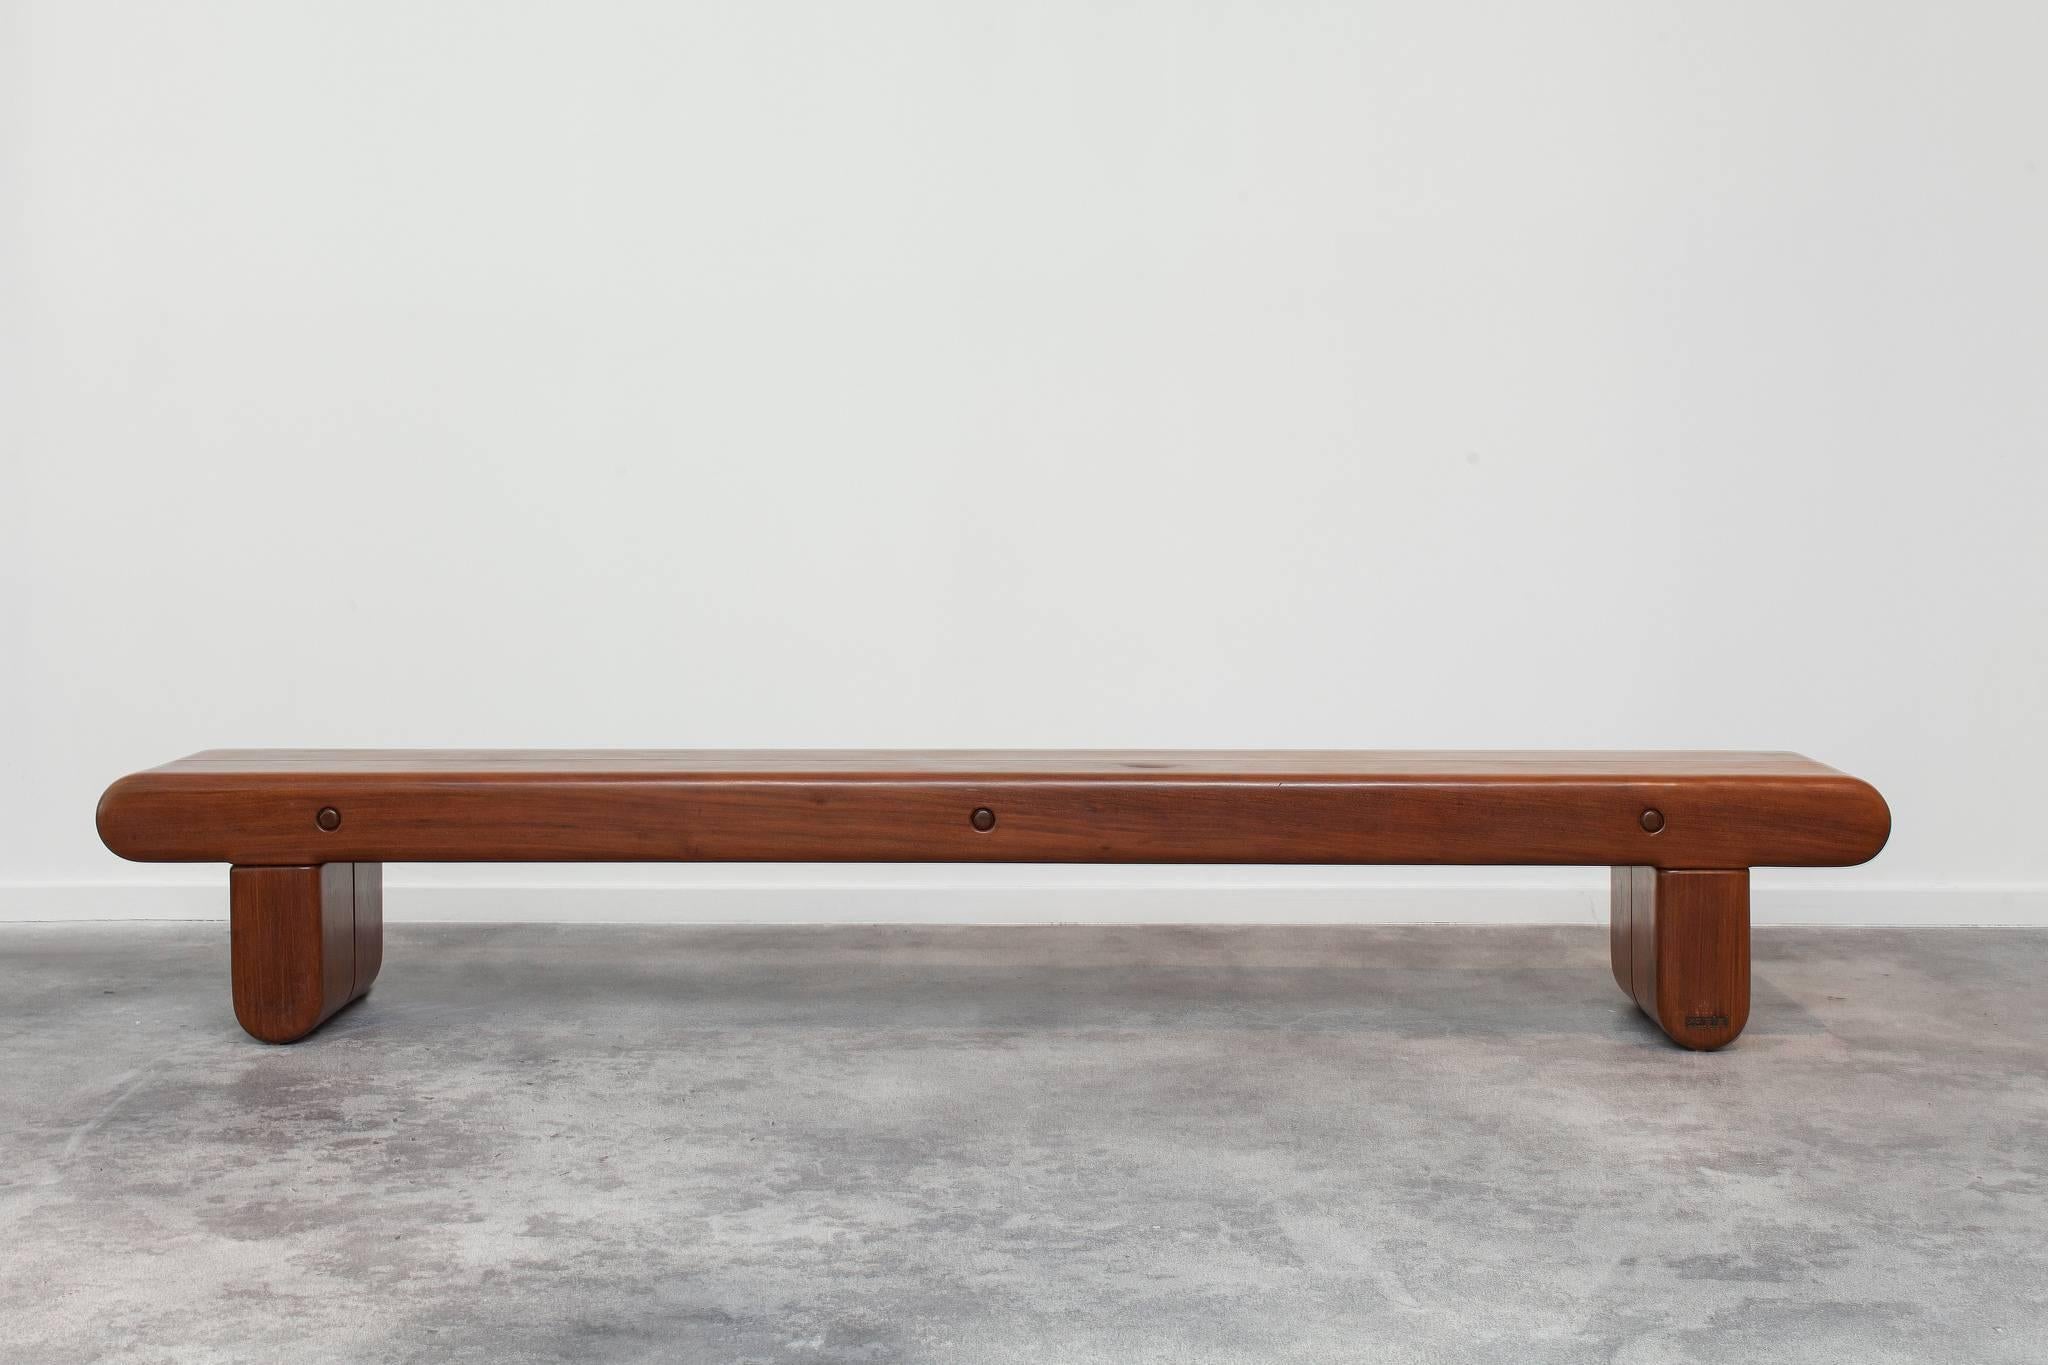 Utilizing a single reclaimed Ipê wood column, the Longo benchs contrasts the warmth and organic nature of its material to the expert carpentry of Zanini’s practice, evident in the piece’s smooth surface and beveled edges that continue his play